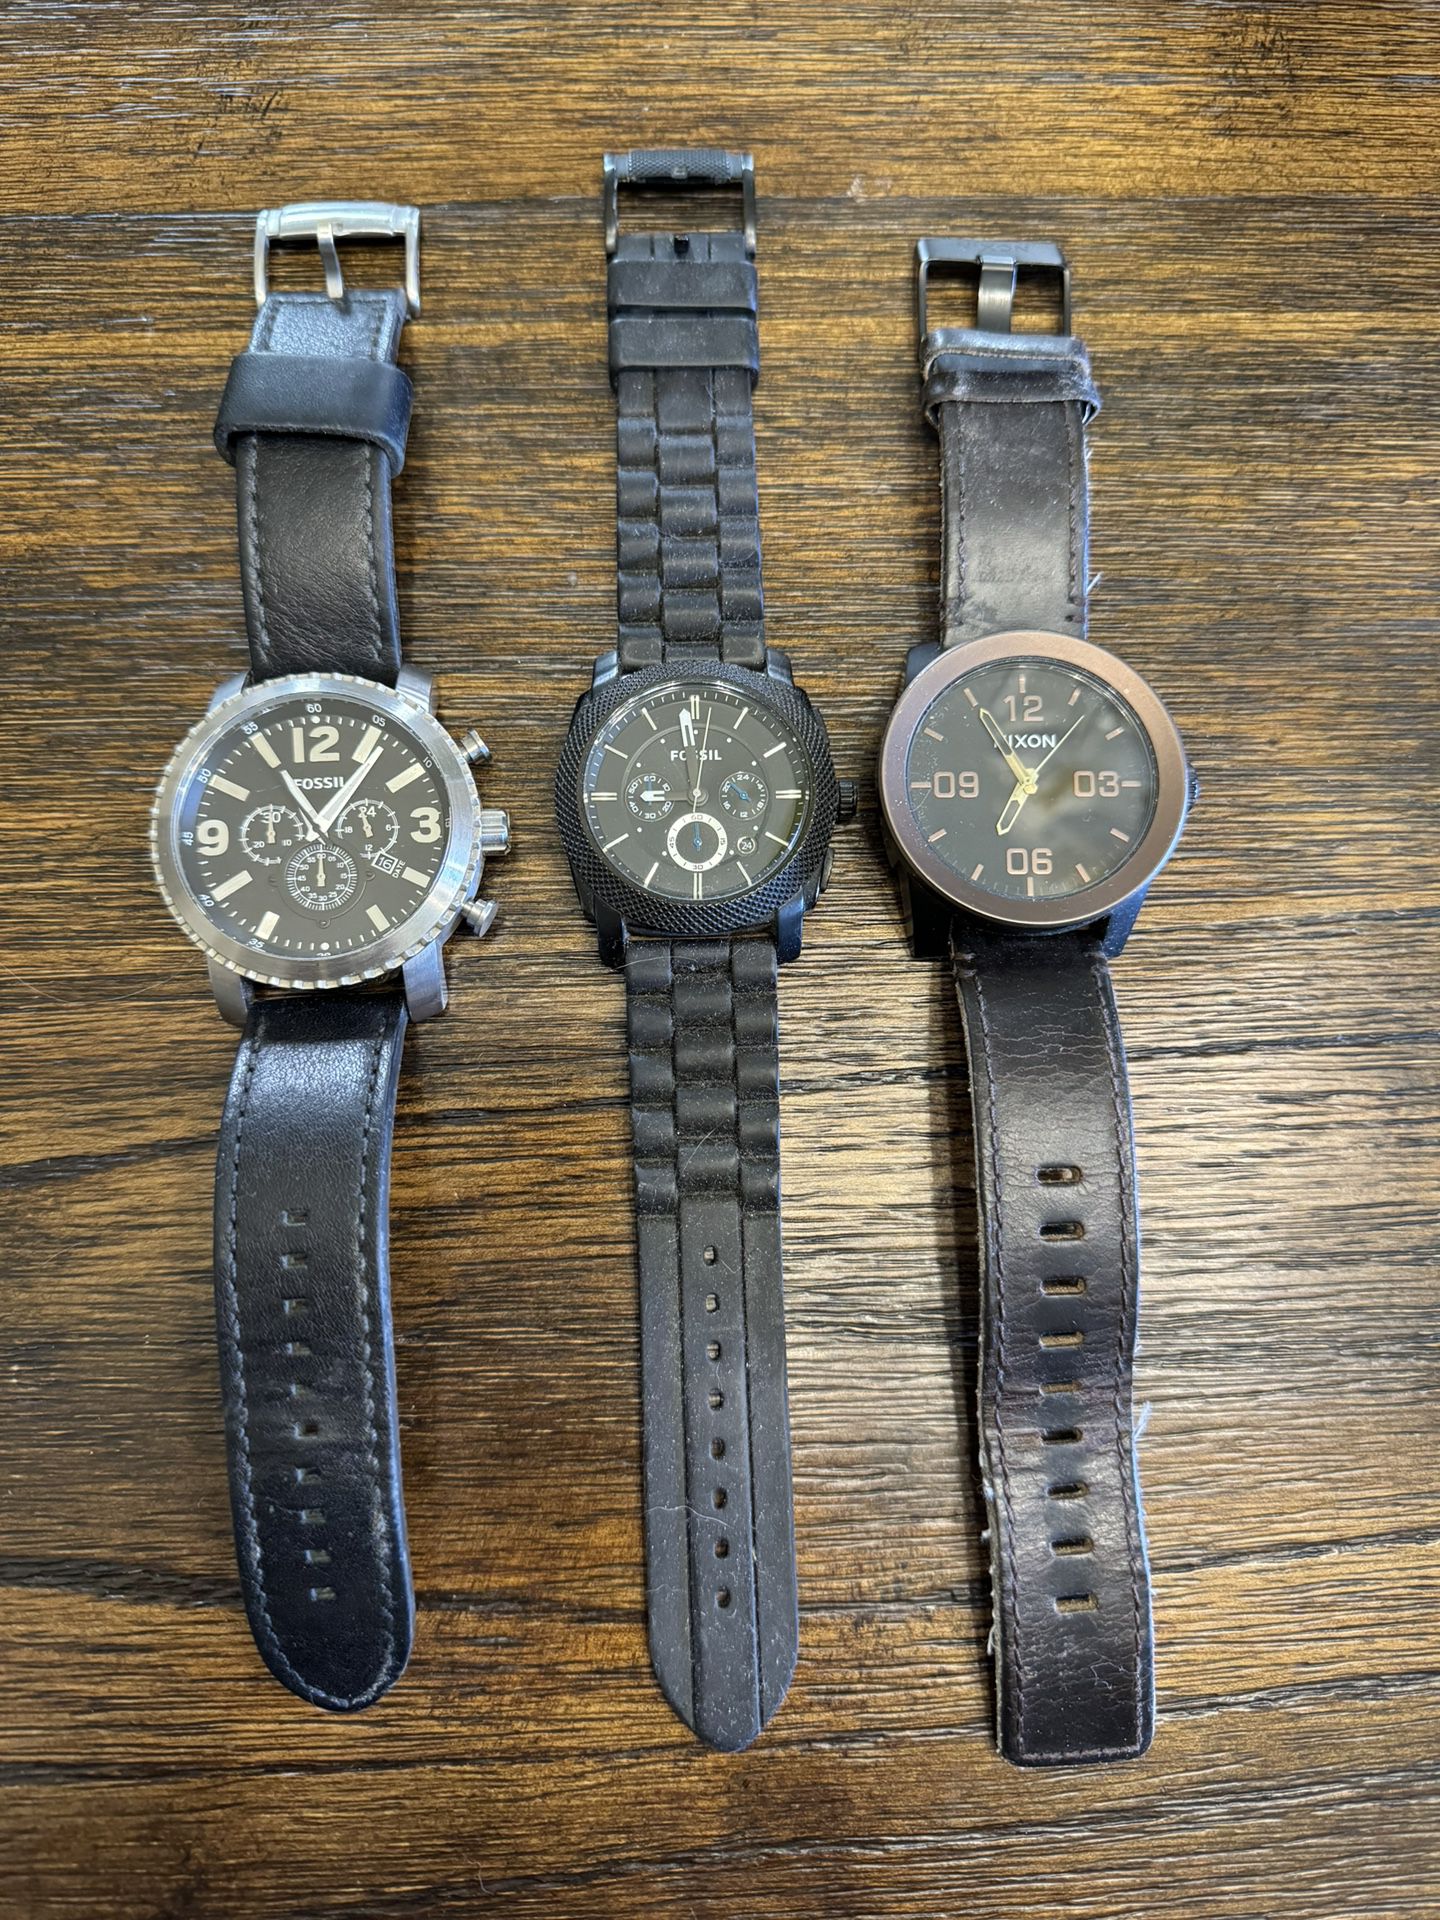 Fossil and Nixon Watches 